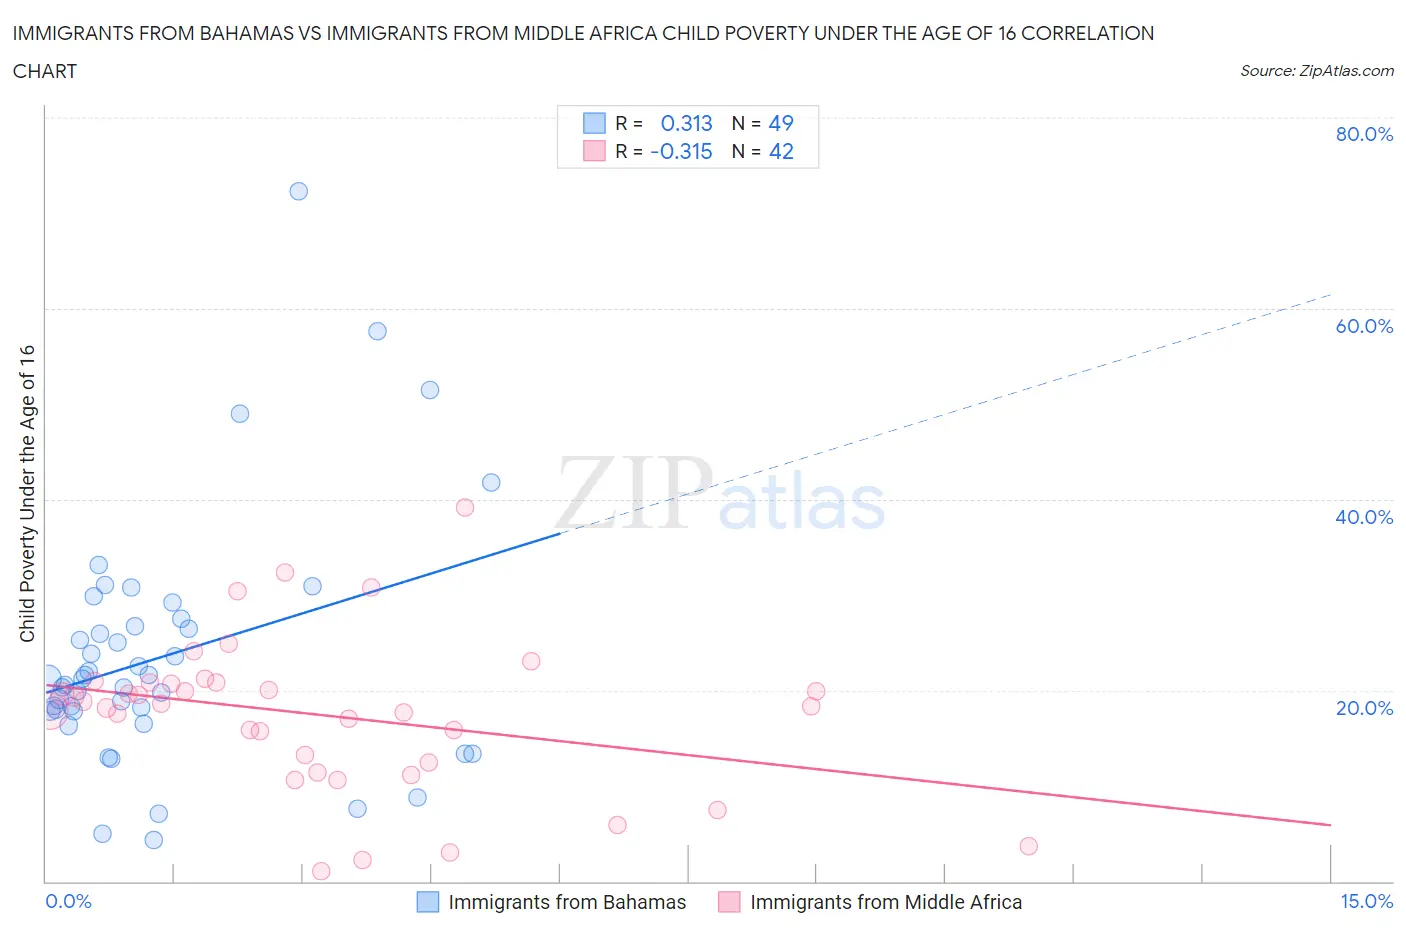 Immigrants from Bahamas vs Immigrants from Middle Africa Child Poverty Under the Age of 16